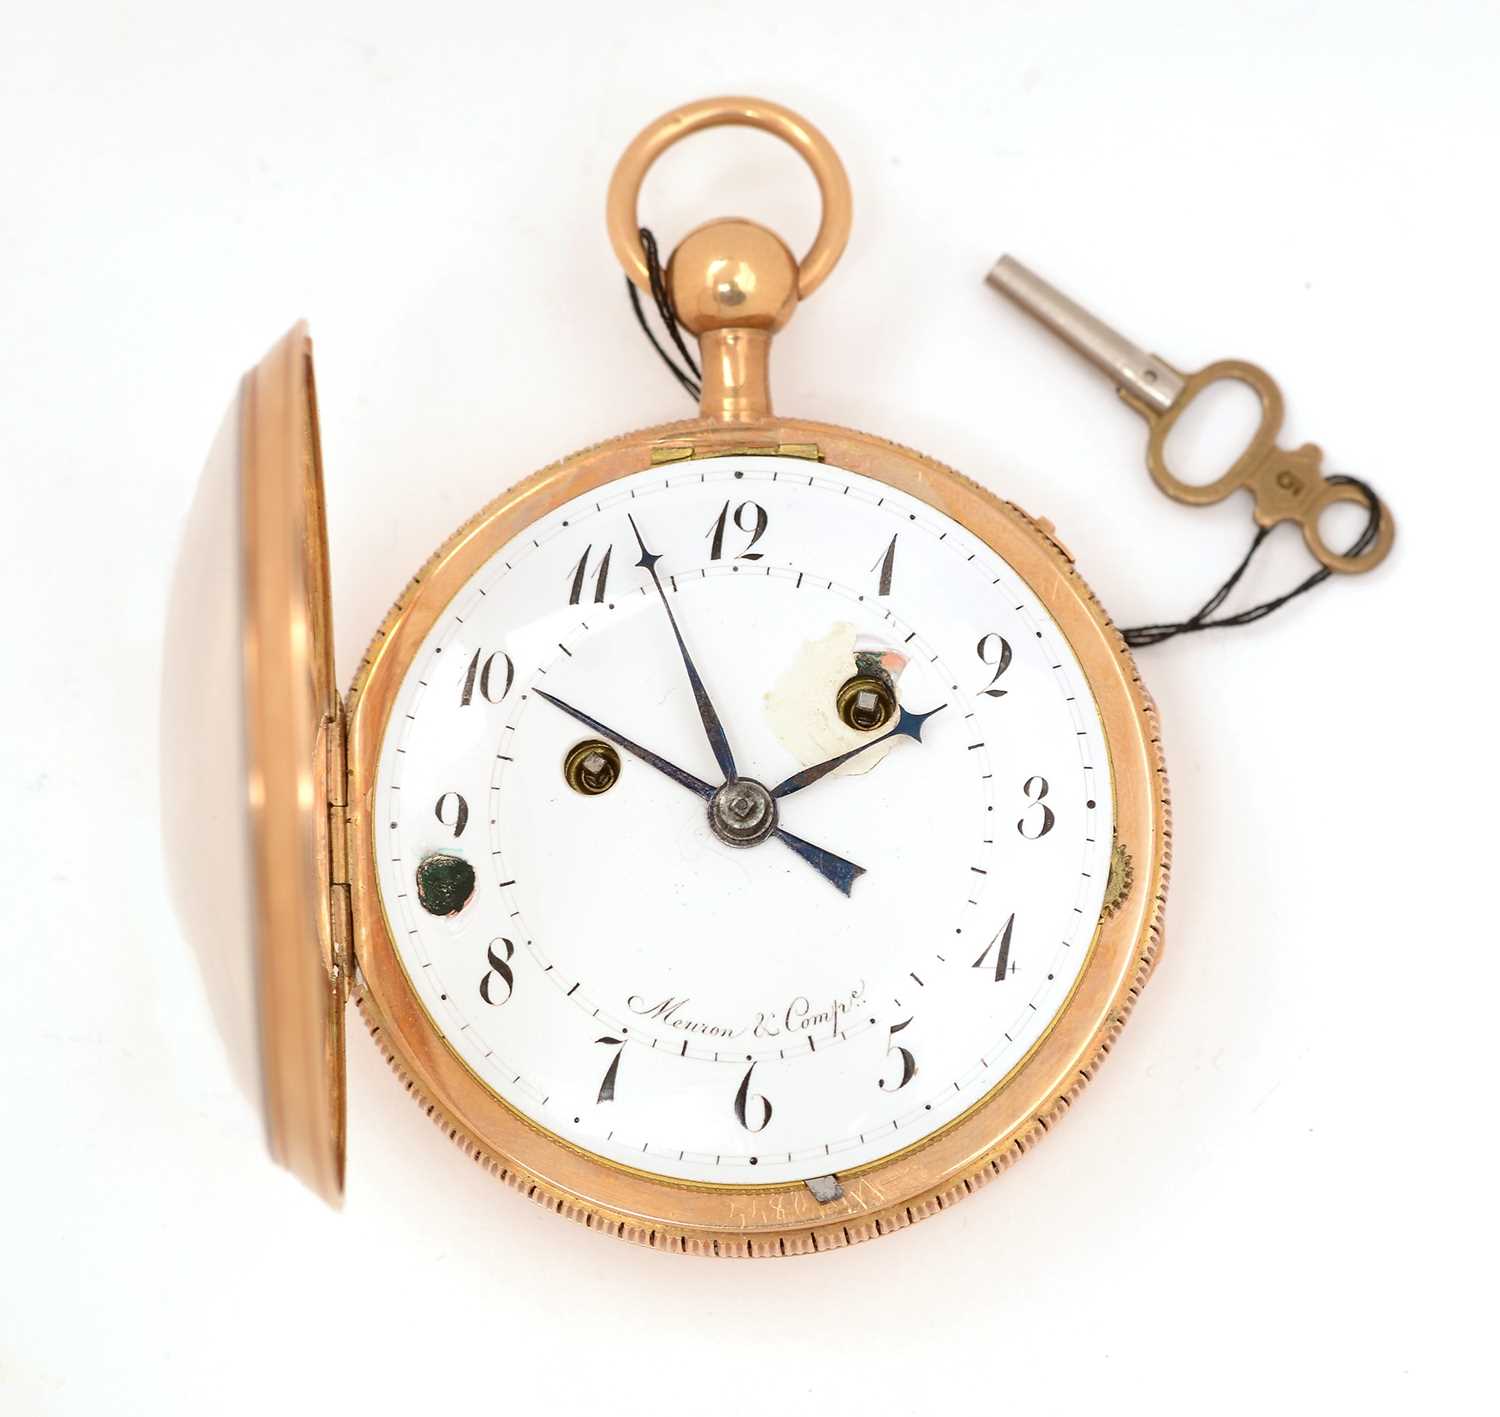 Lot 44 - Meuron & Comp: a yellow metal cased alarm and repeating pocket watch